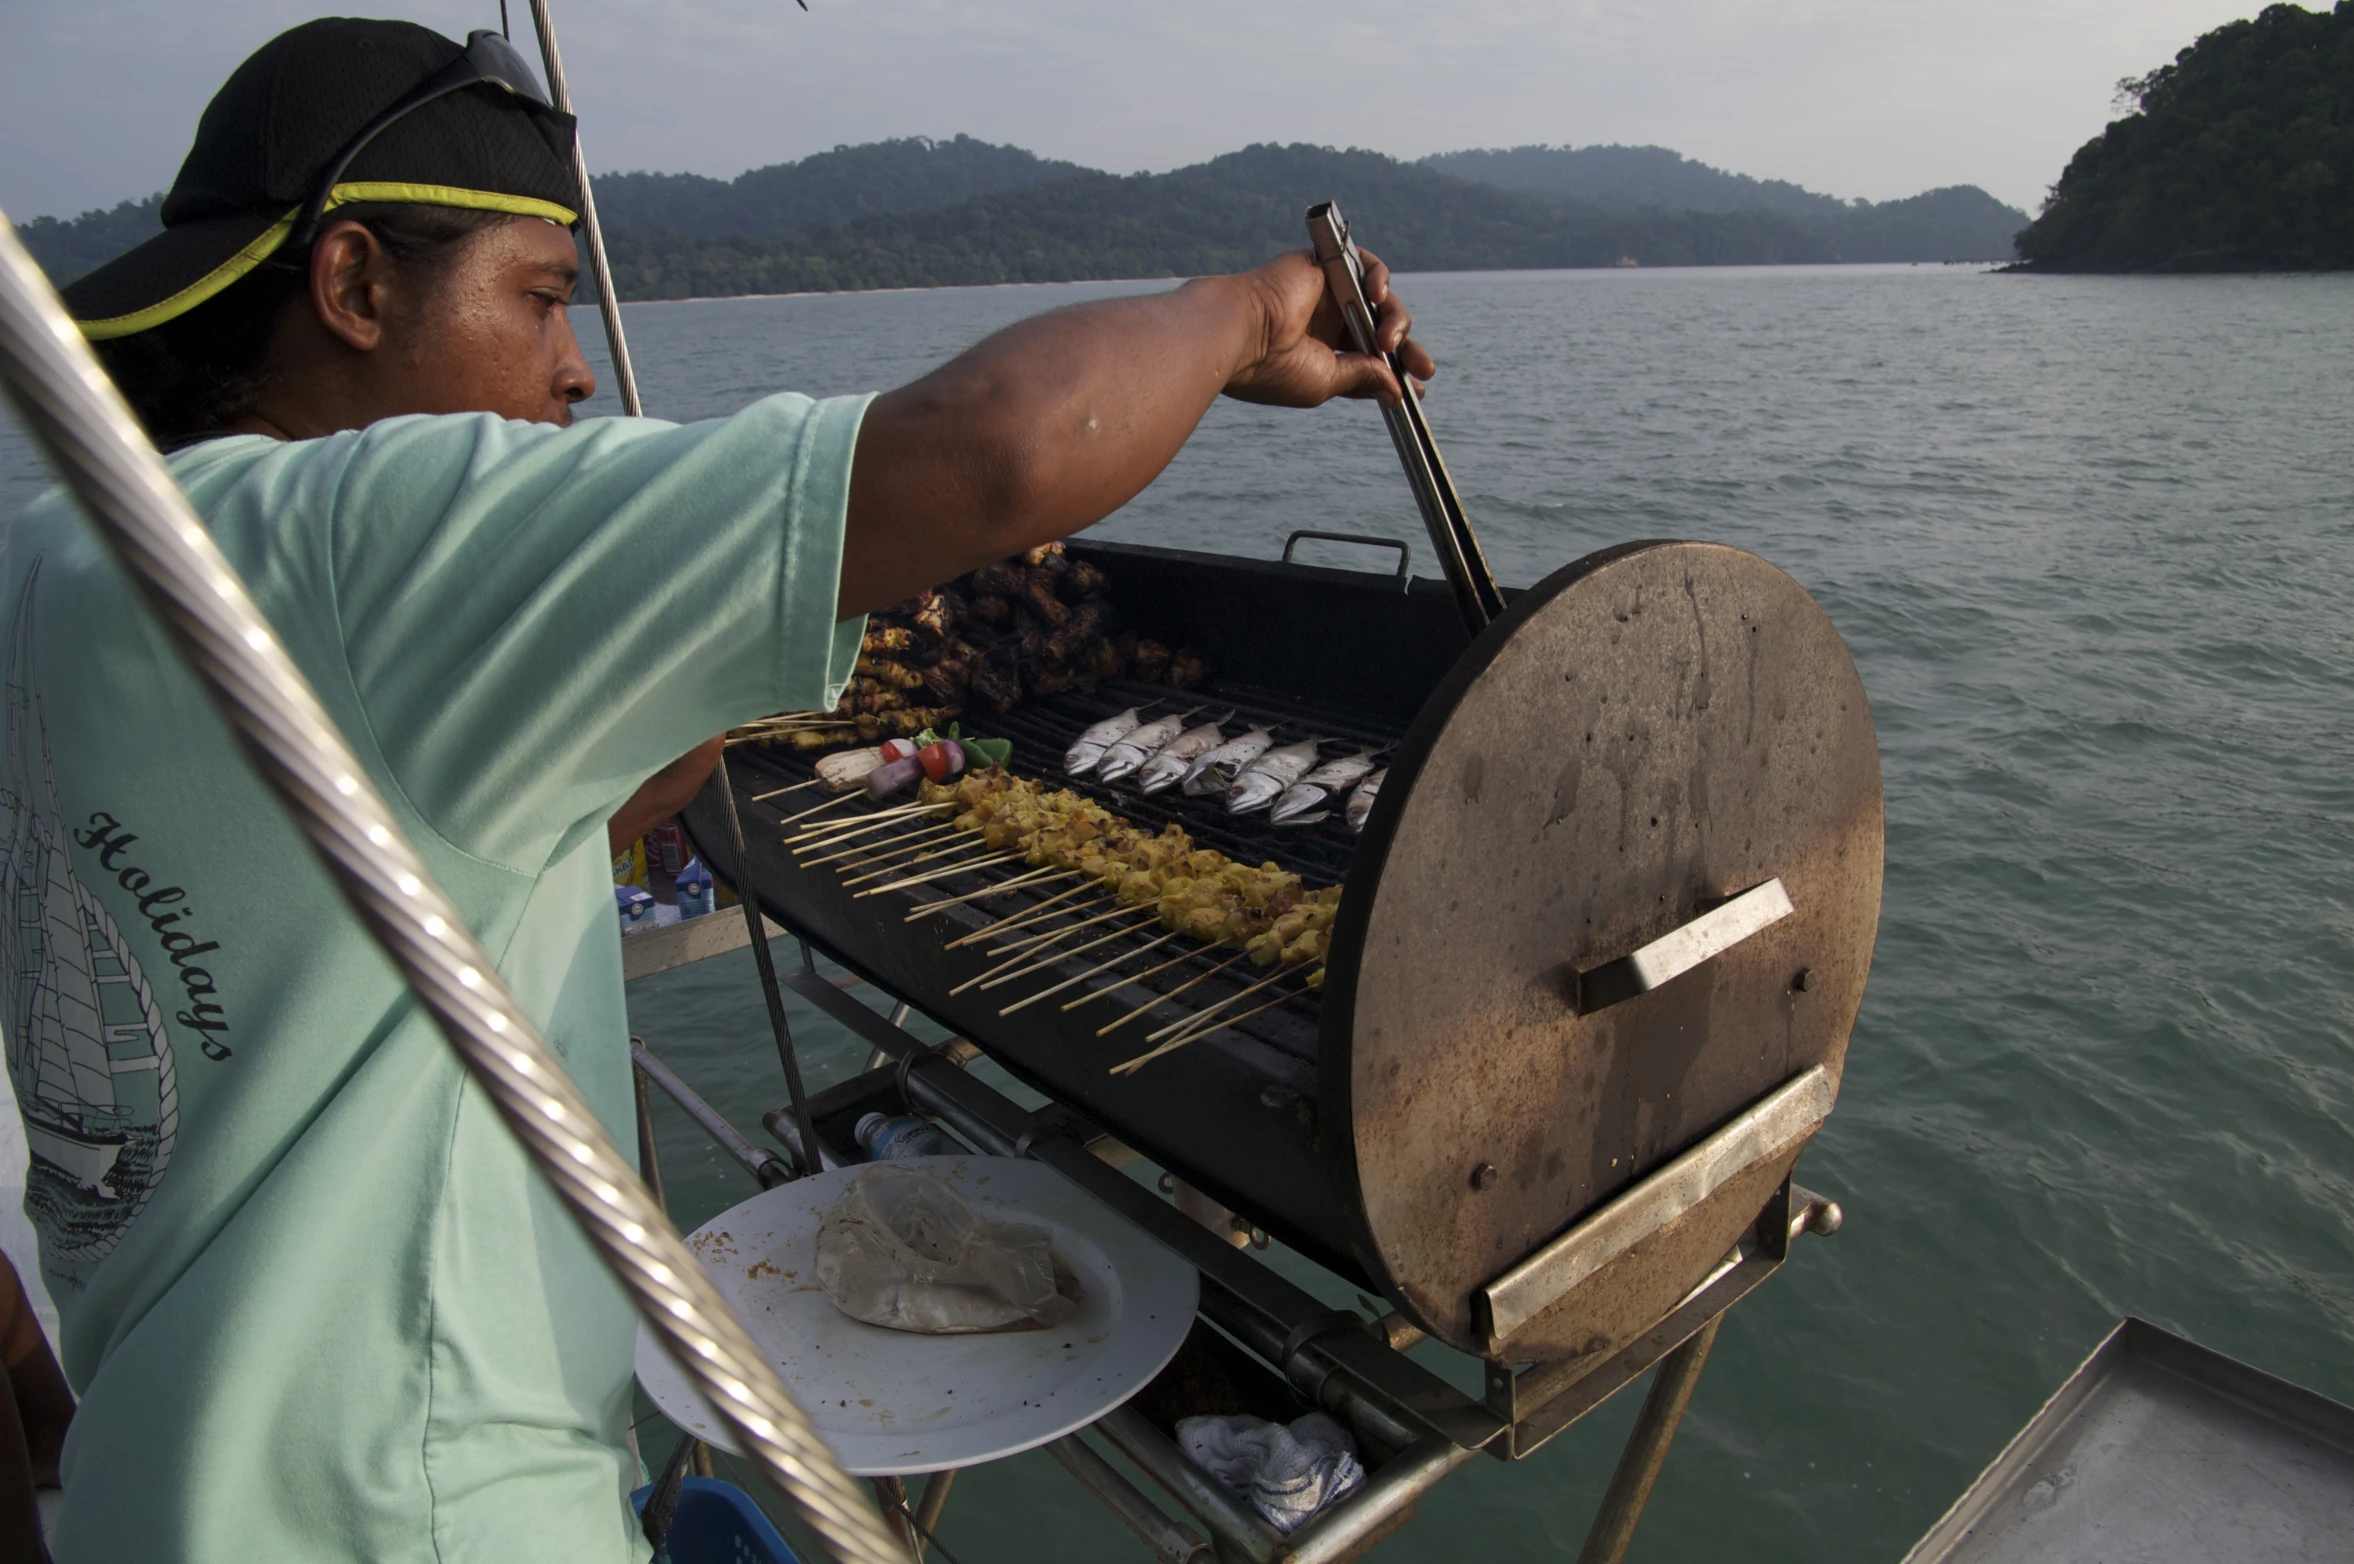 the man is cooking dinner on the grill by the water